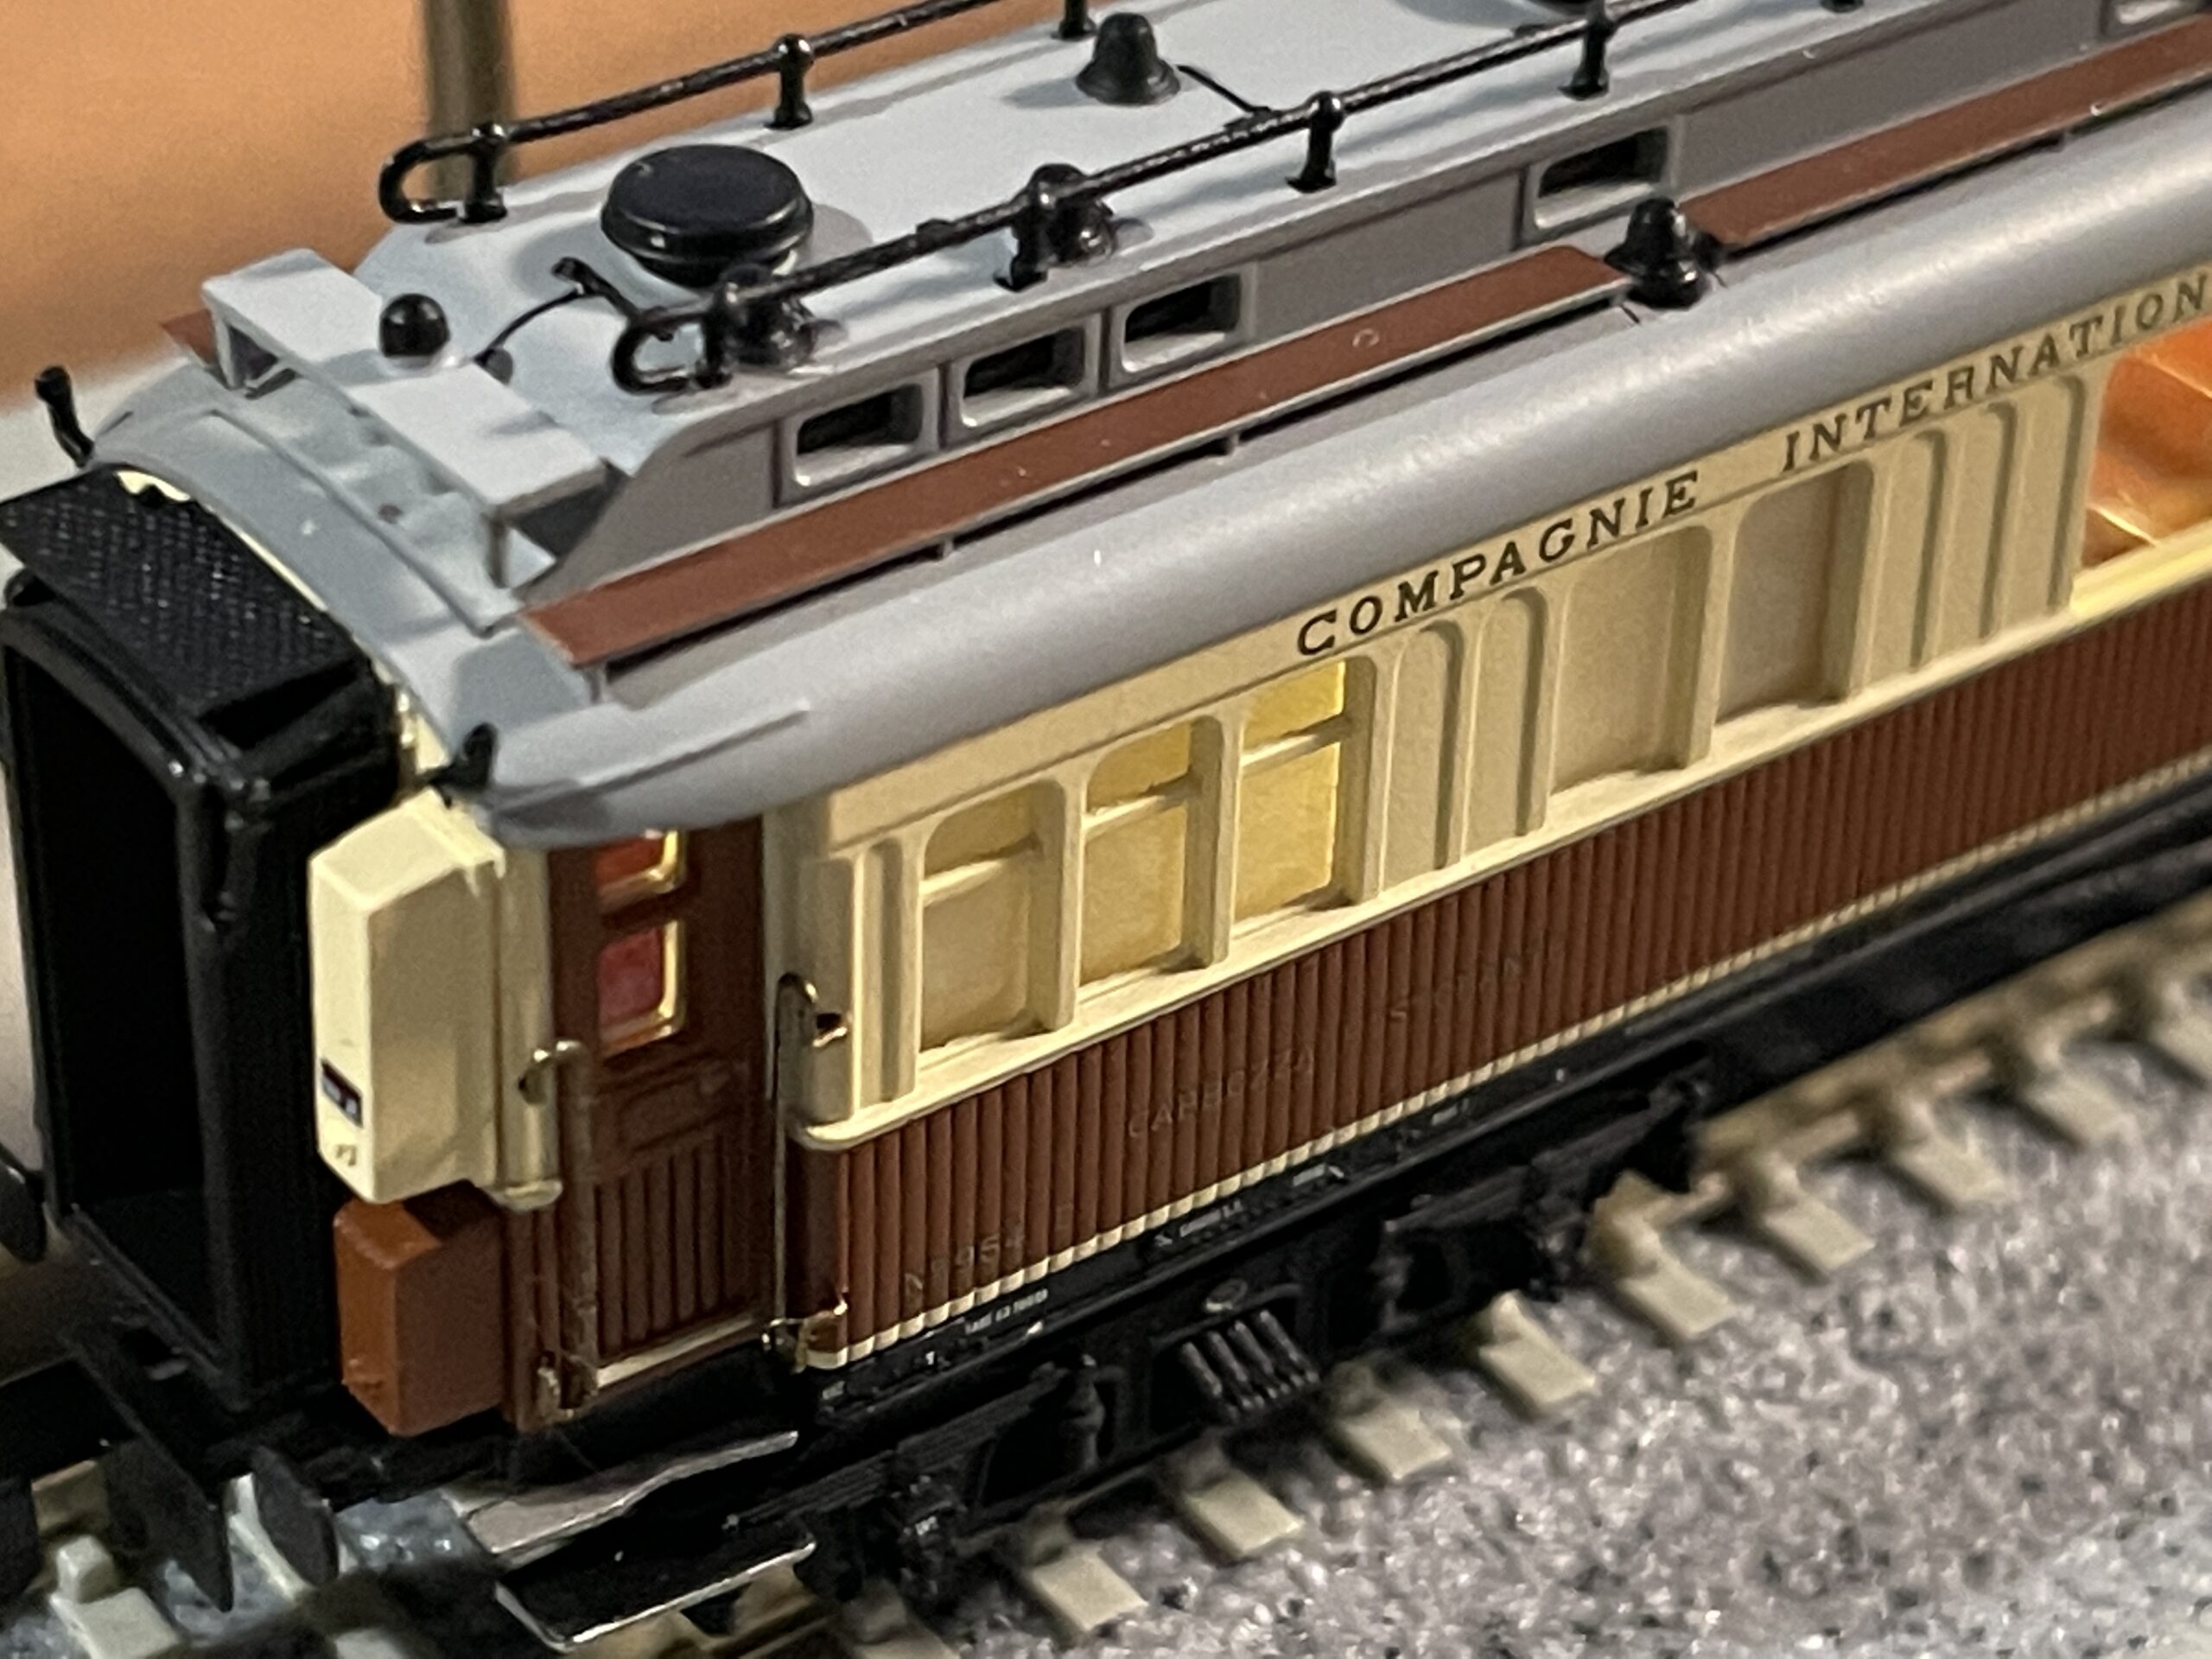 New on the Layout – Swiss Federal Railways RE 4/4 and Simplon Express Cars